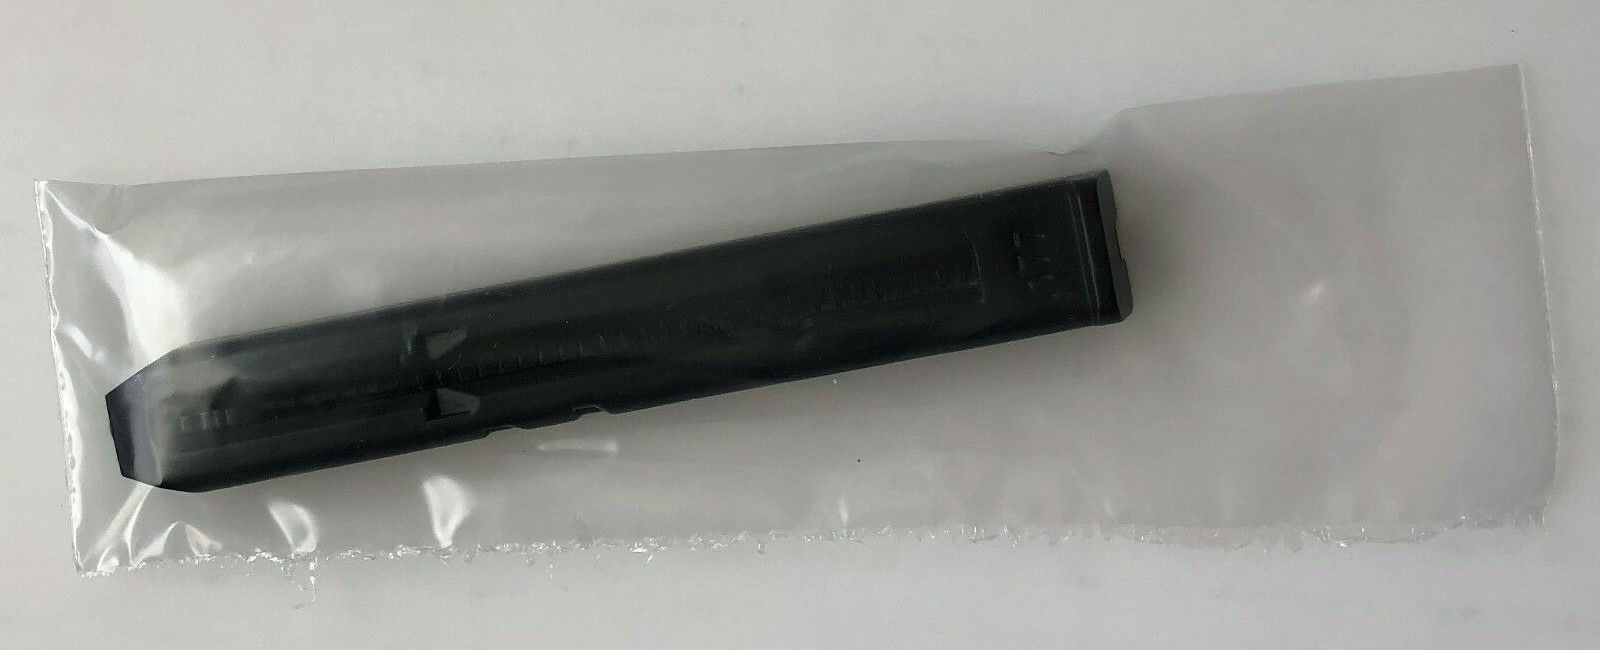 Gamo Free shipping on posting reviews GP-20 BB Air Gun Pistol Magazine BBs Outlet ☆ Free Shipping .17 with Steel for use